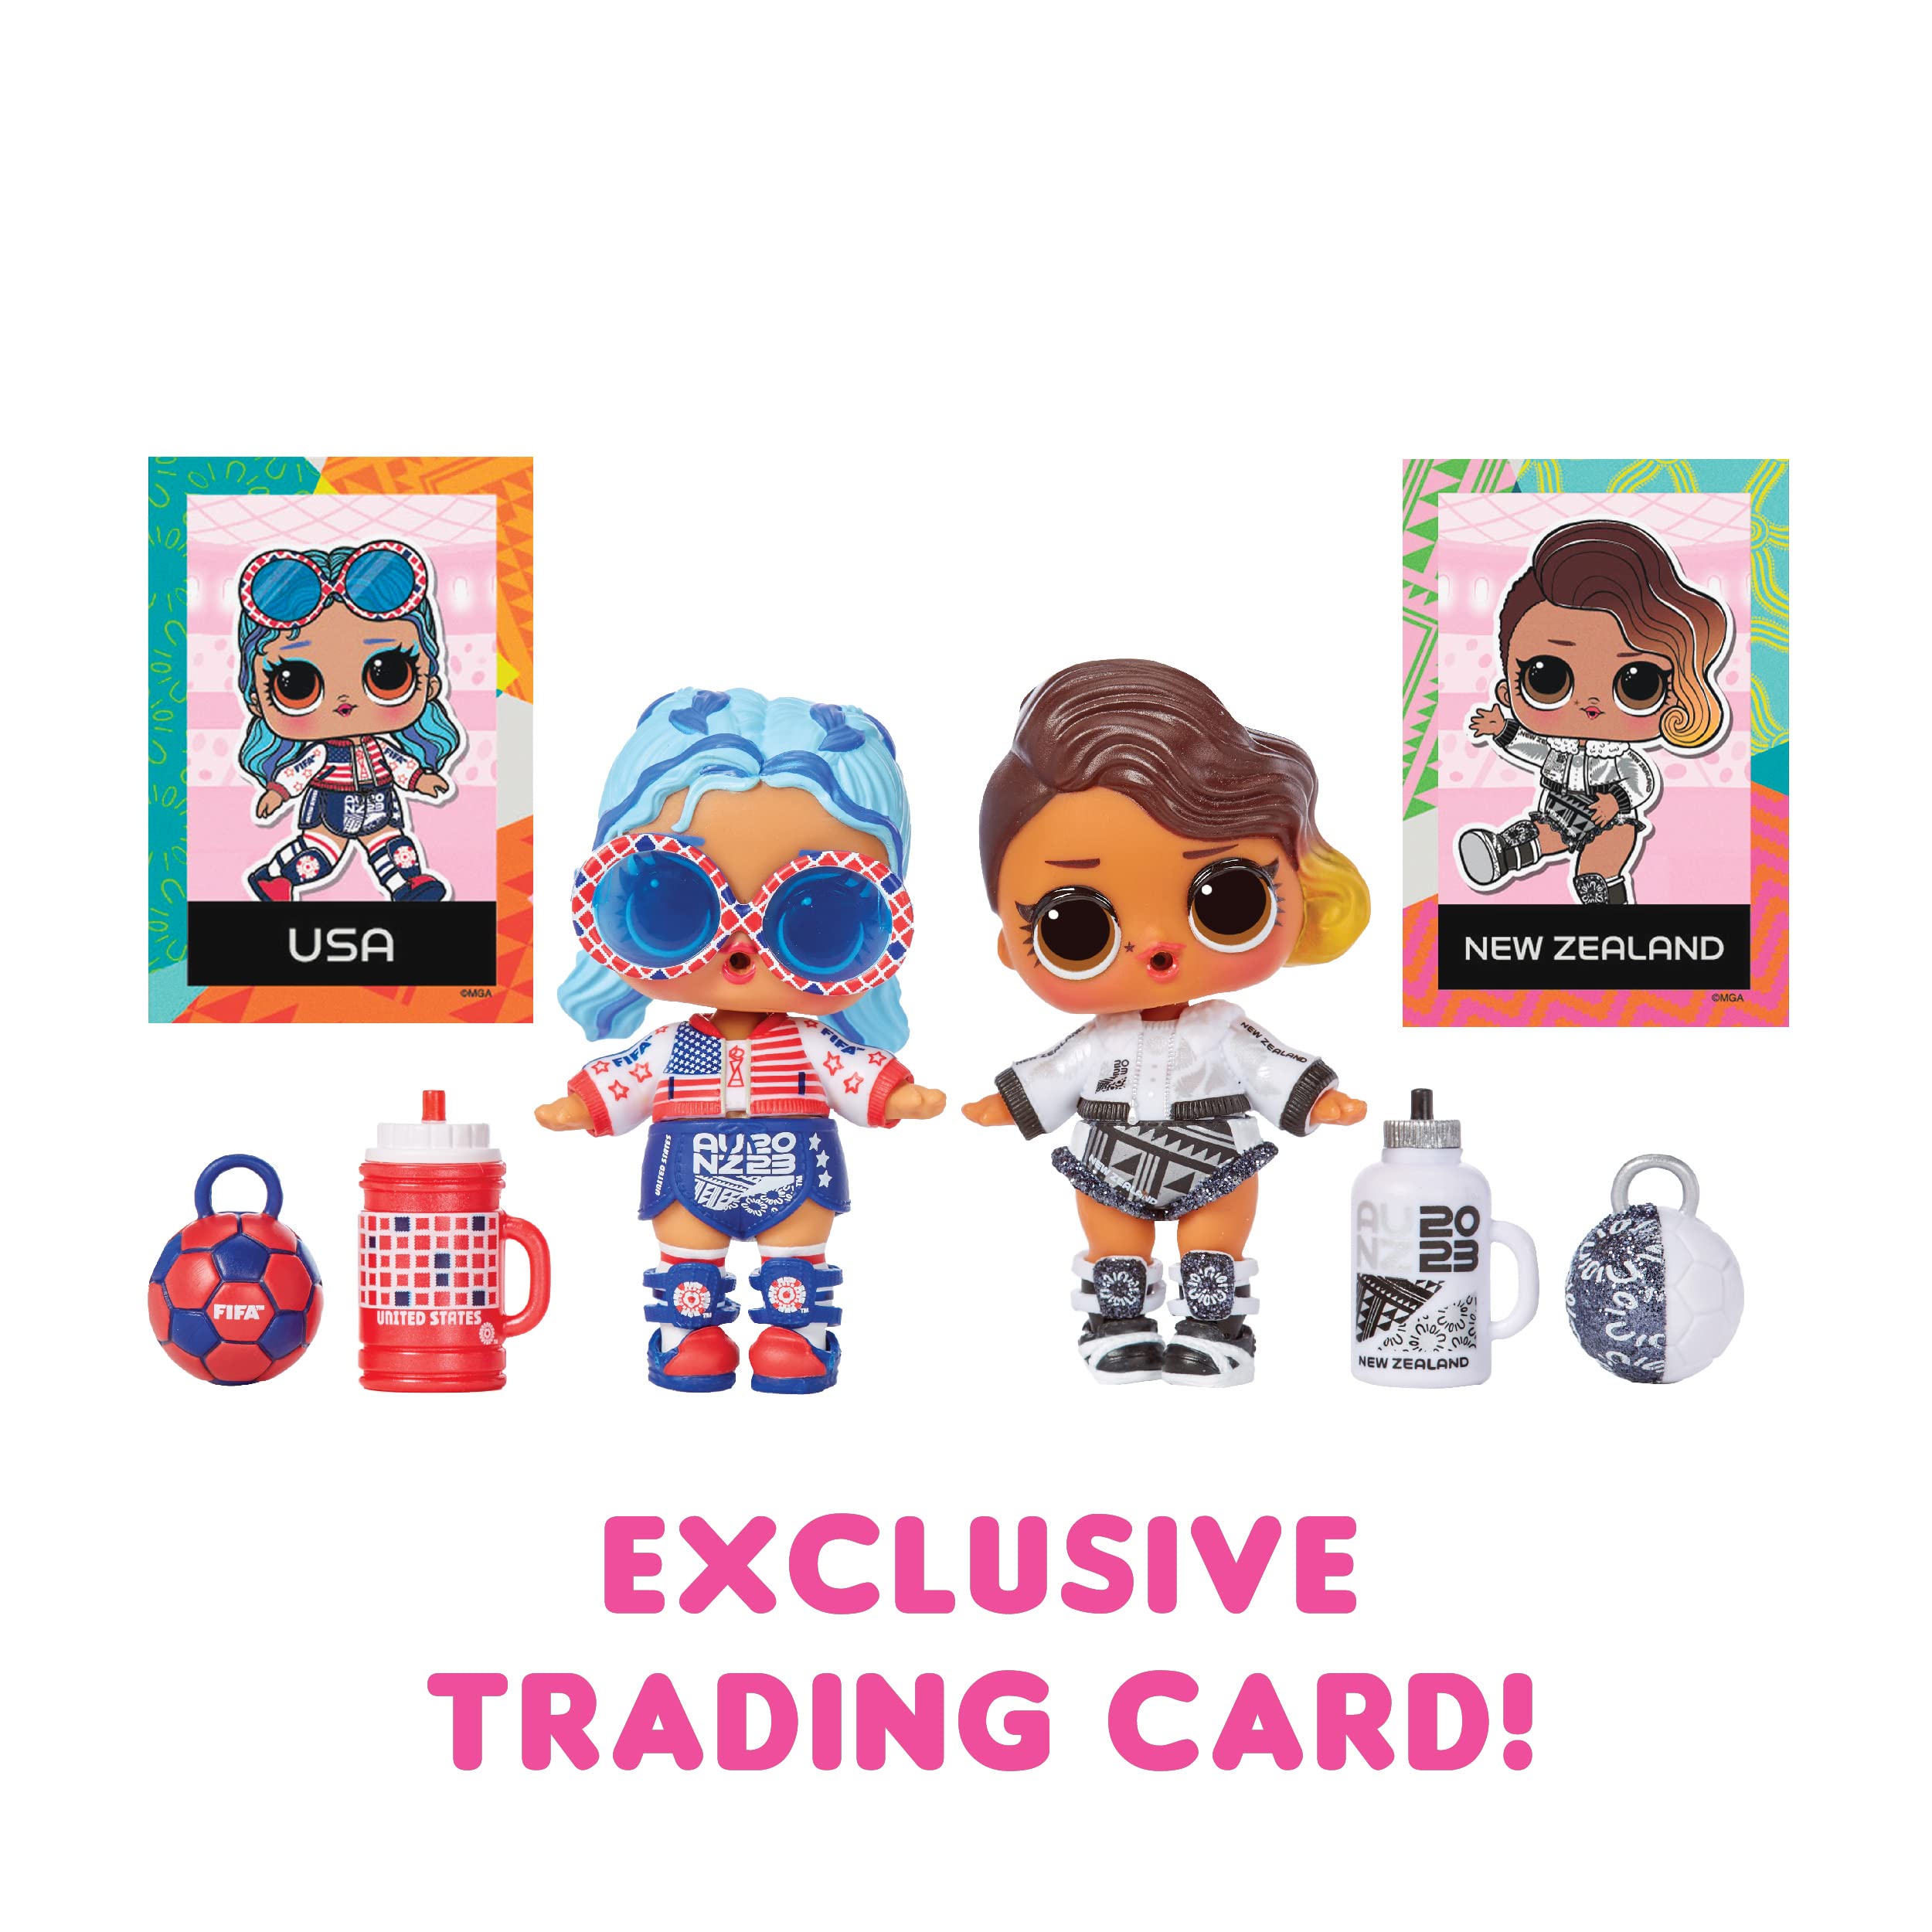 LOL Surprise X FIFA Women's World Cup Australia & New Zealand 2023 Dolls with 7 Surprises, Accessories, Limited Edition Dolls, Collectible Dolls, Soccer- Themed Dolls- Great Gift for Girls Age 4+